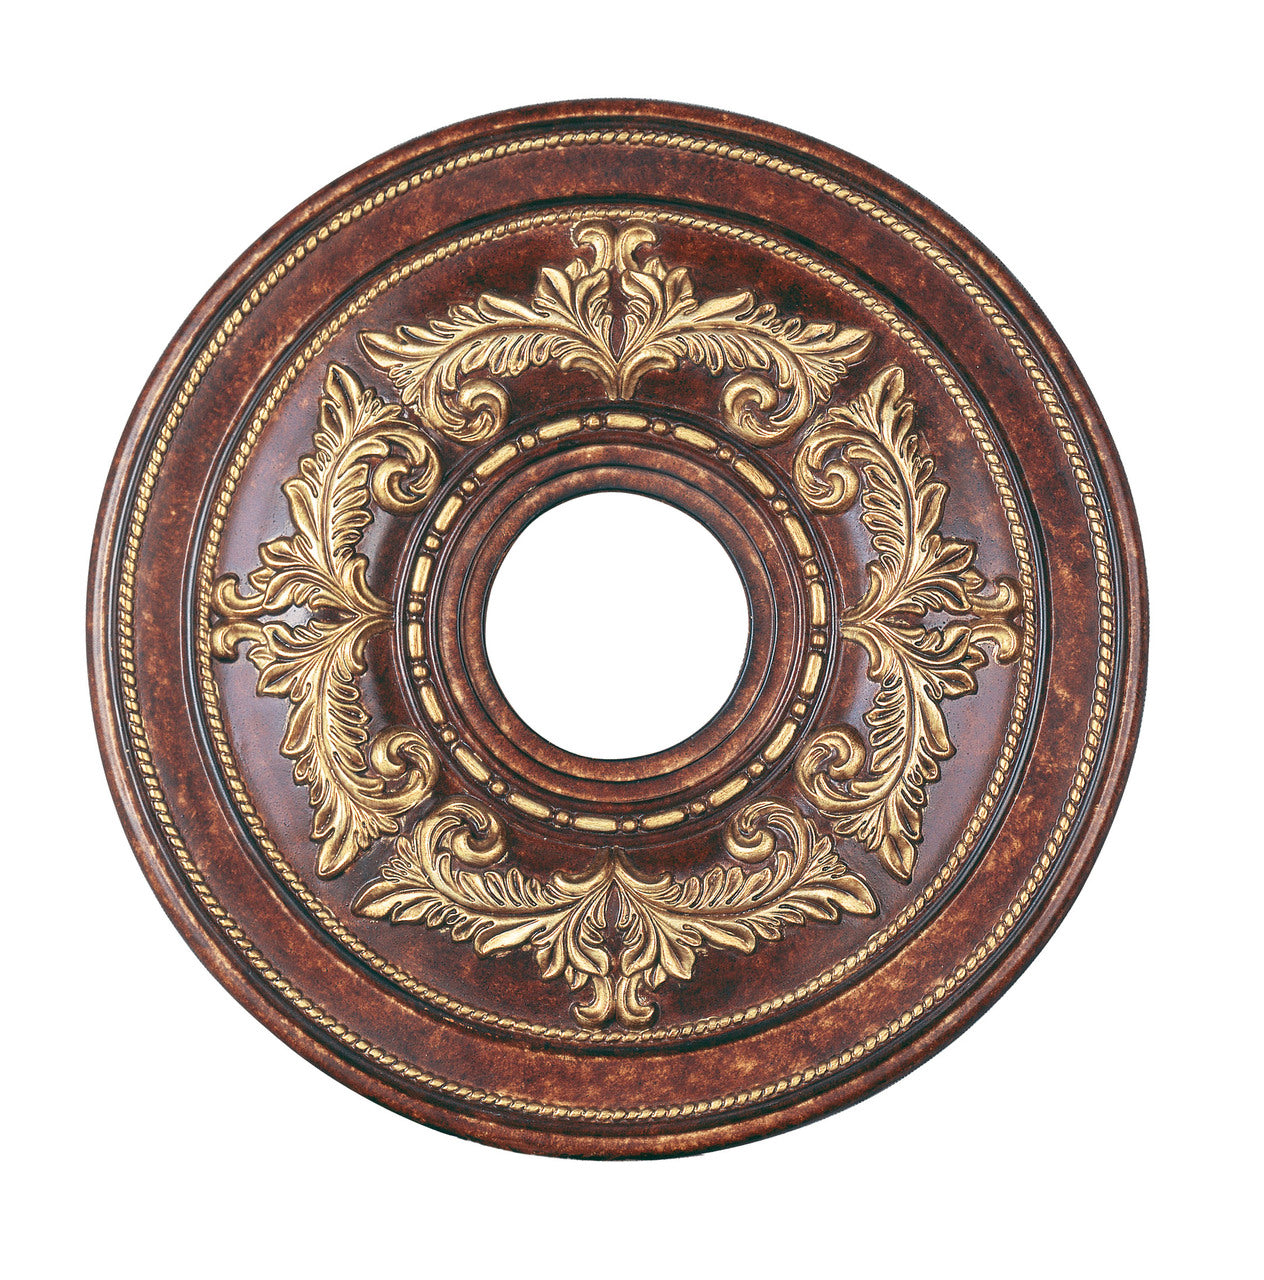 LIVEX Lighting 8205-63 Ceiling Medallion in Verona Bronze with Aged Gold Leaf Accents